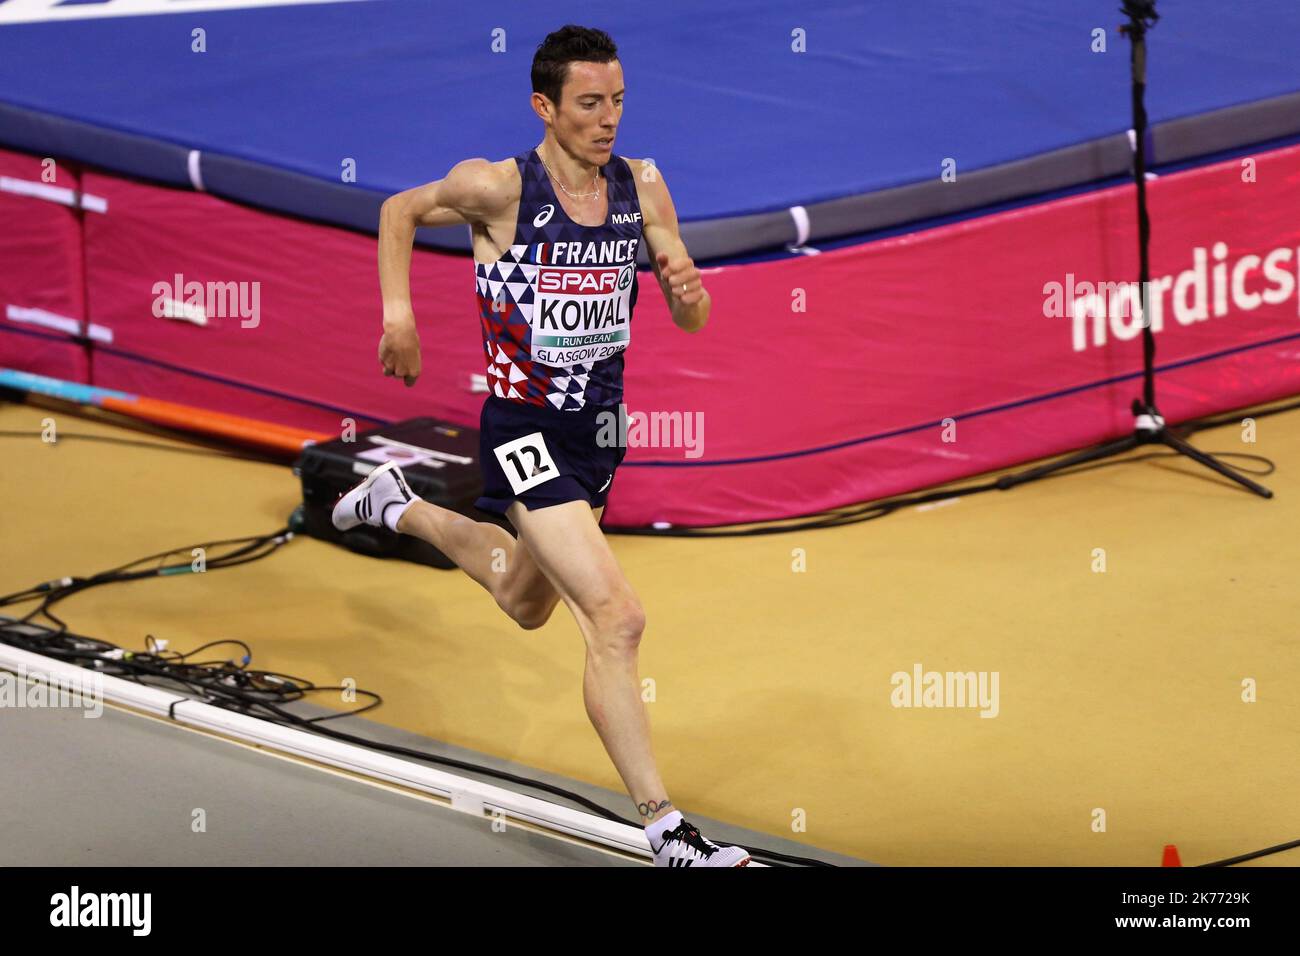 Yohan Kowal of France 3000 M Round 1 Heat 2 during the European Athletics Indoor Championships Glasgow 2019 on March 1, 2019 at the Emirates Arena in Glasgow, Scotland  Stock Photo